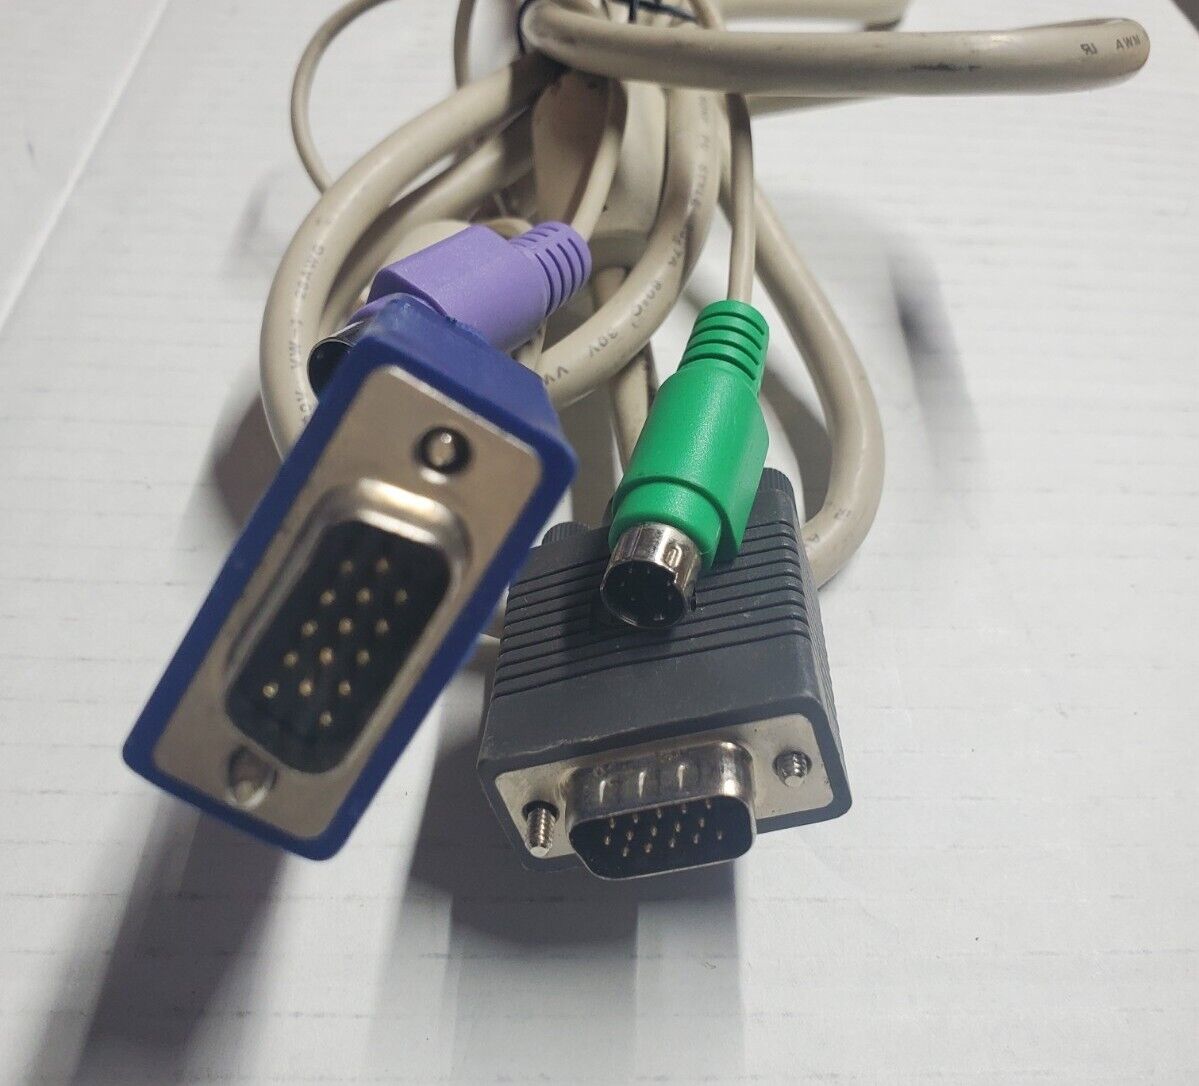 Low Voltage Computer Cable Space Shuttle-C AWM E101344 Style 2919VW-1 LL80671 